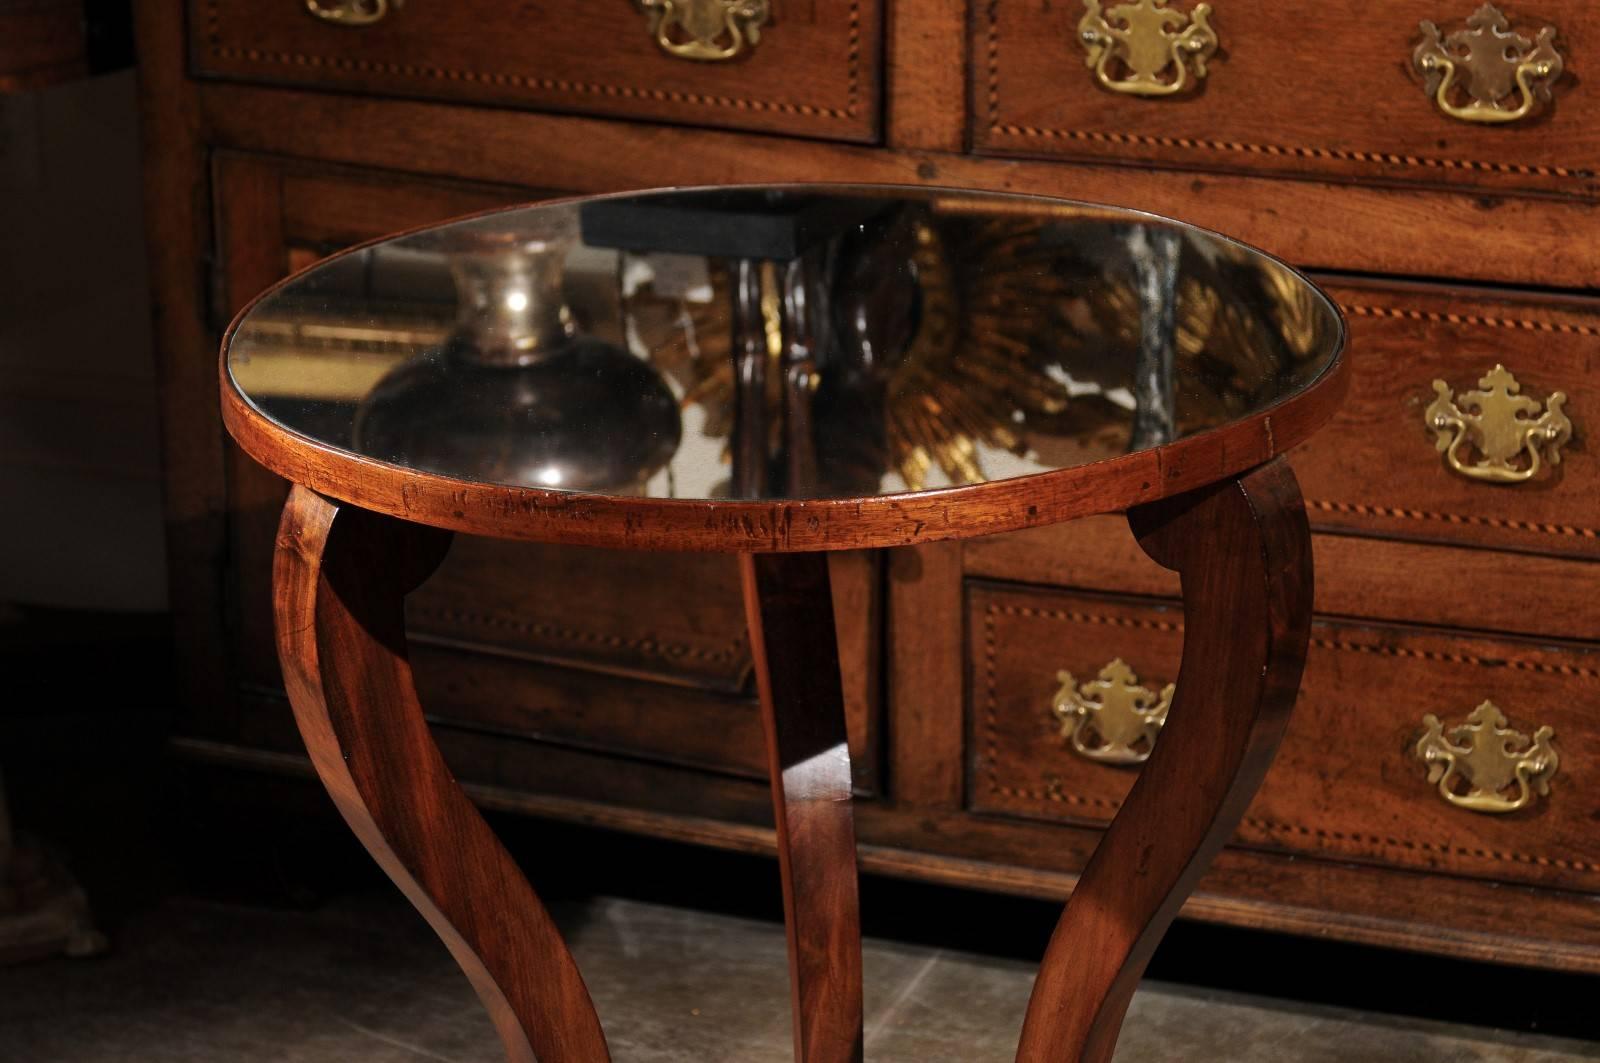 19th Century French Mahogany Restauration Style Guéridon Table with Mirrored Top, circa 1870